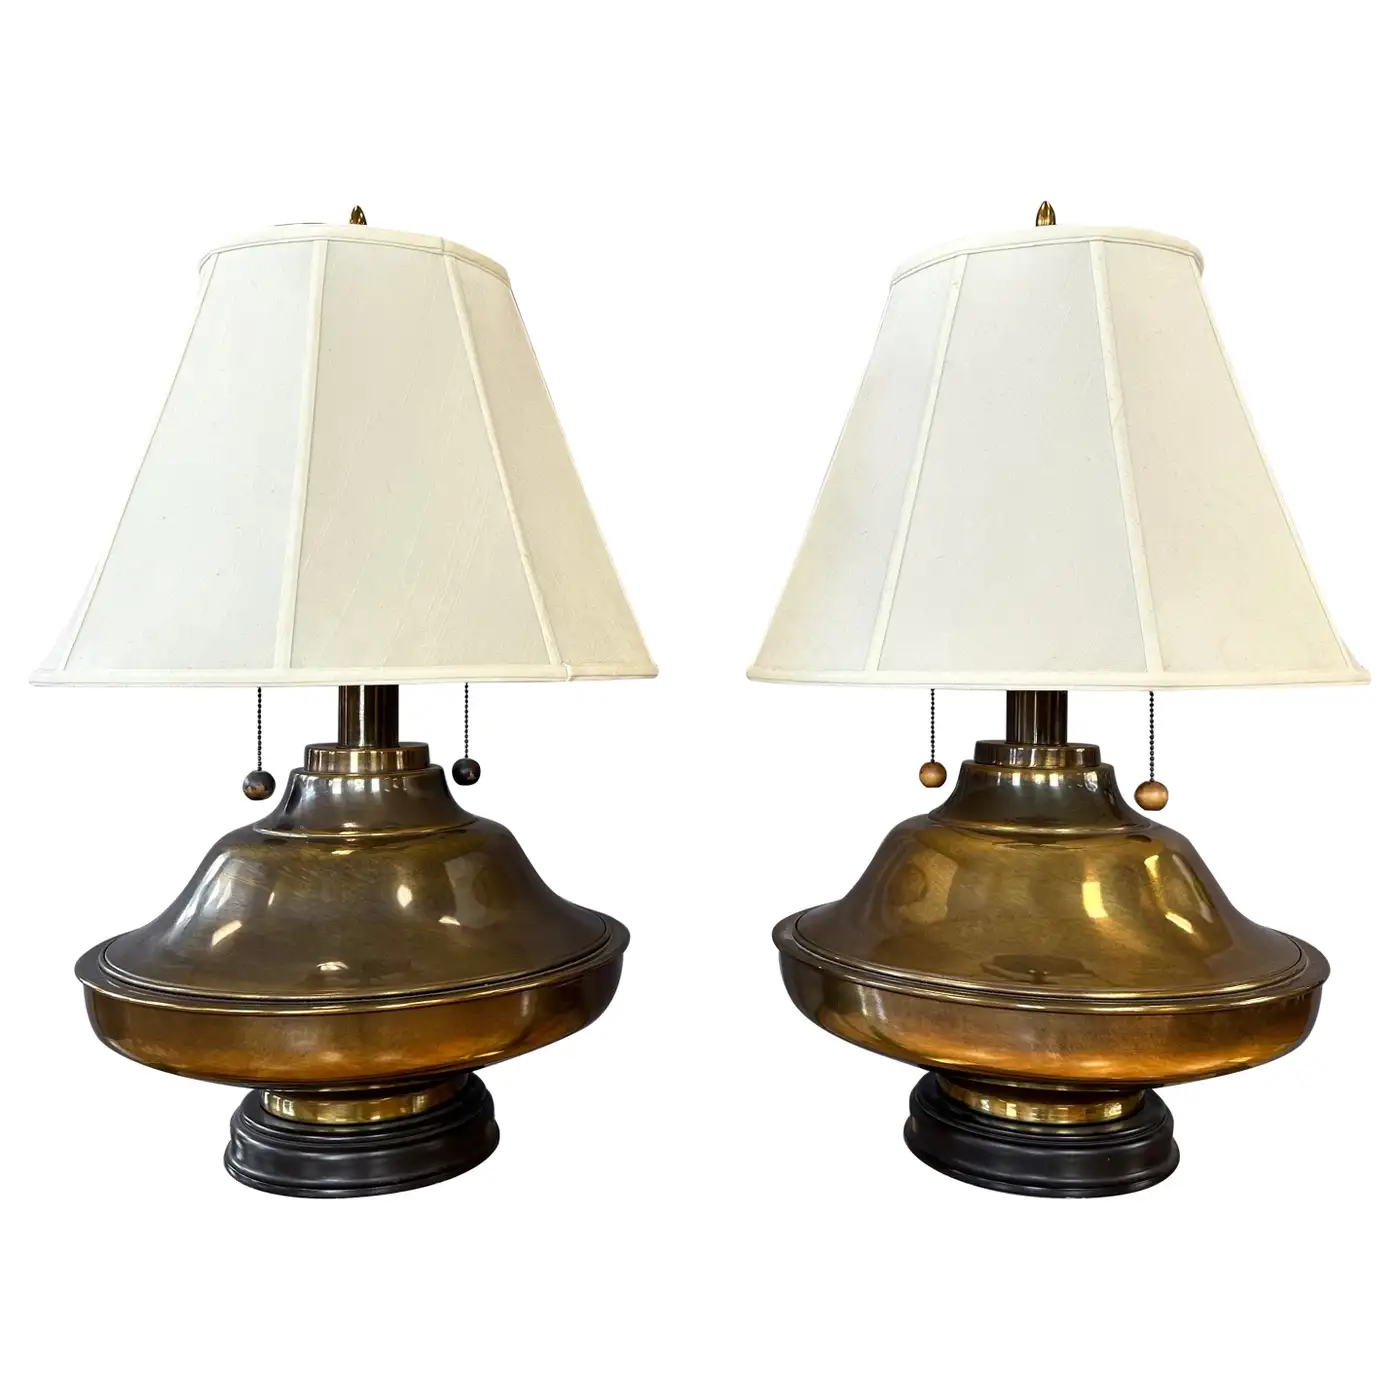 https://pastperfectsf.com/wp-content/uploads/2023/09/Pair-of-Monumental-Marbro-Style-Antiqued-Brass-Table-Lamps-with-Shades-1960s-1.jpg.webp